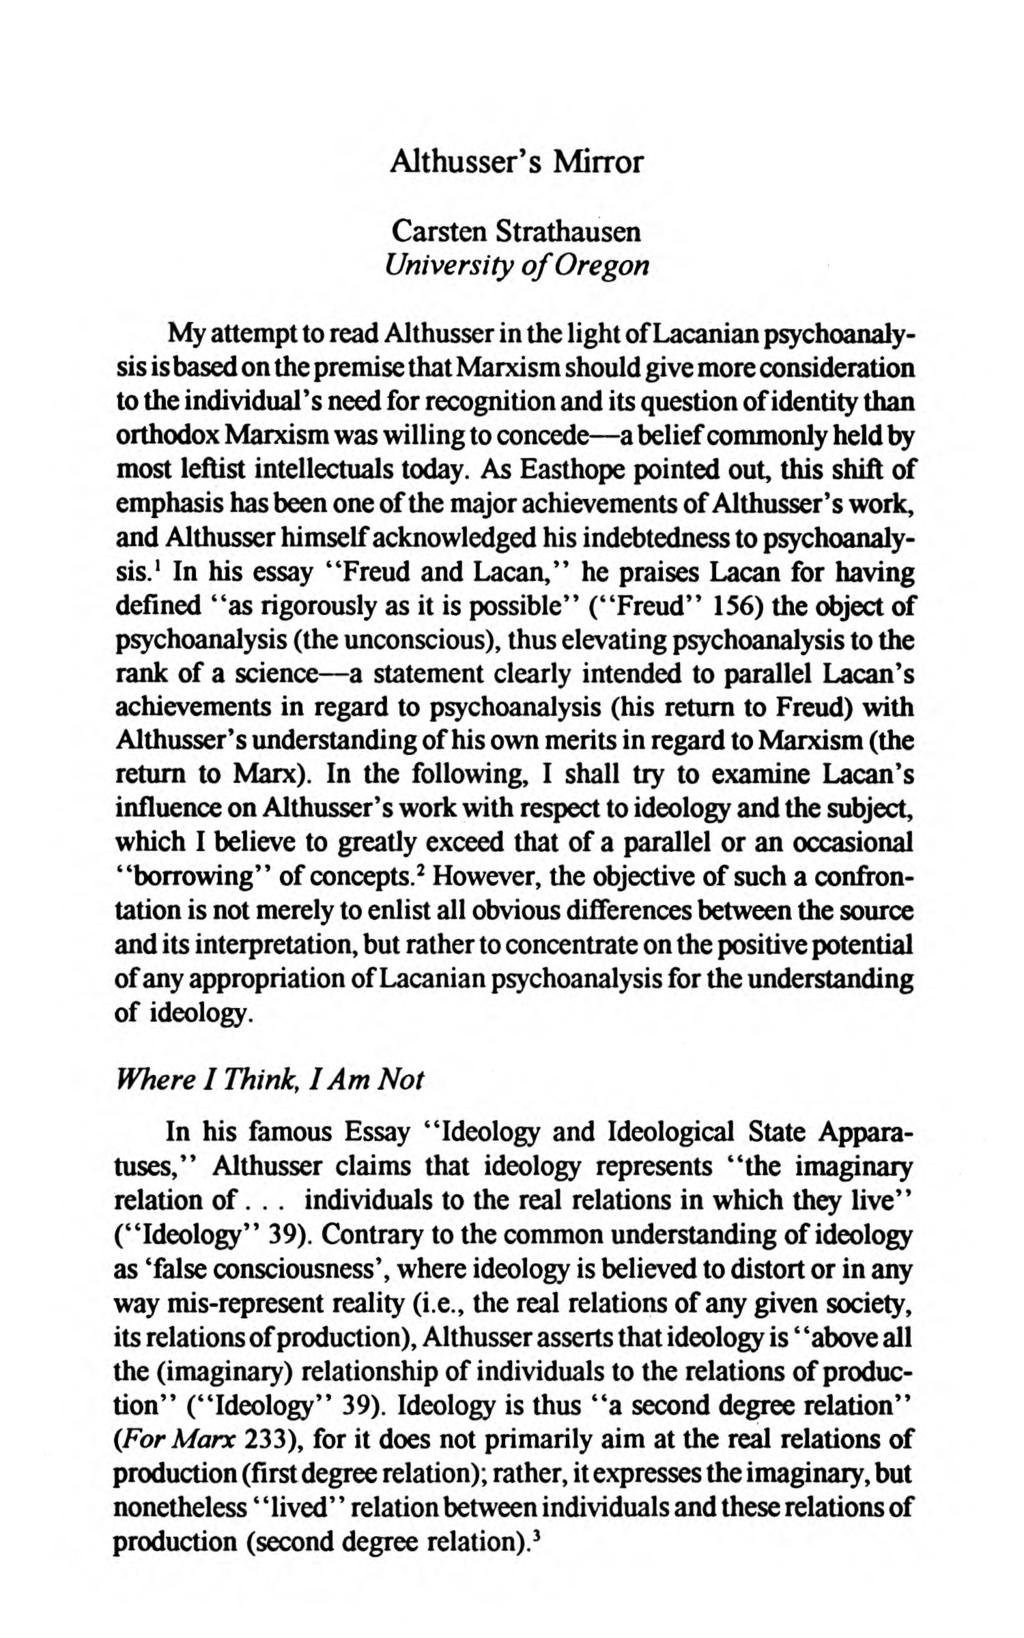 Strathausen: Althusser's Mirror Althusser's Mirror Carsten Strathausen University of Oregon My attempt to read Althusser in the light of Lacanian psychoanalysis is based on the premise that Marxism